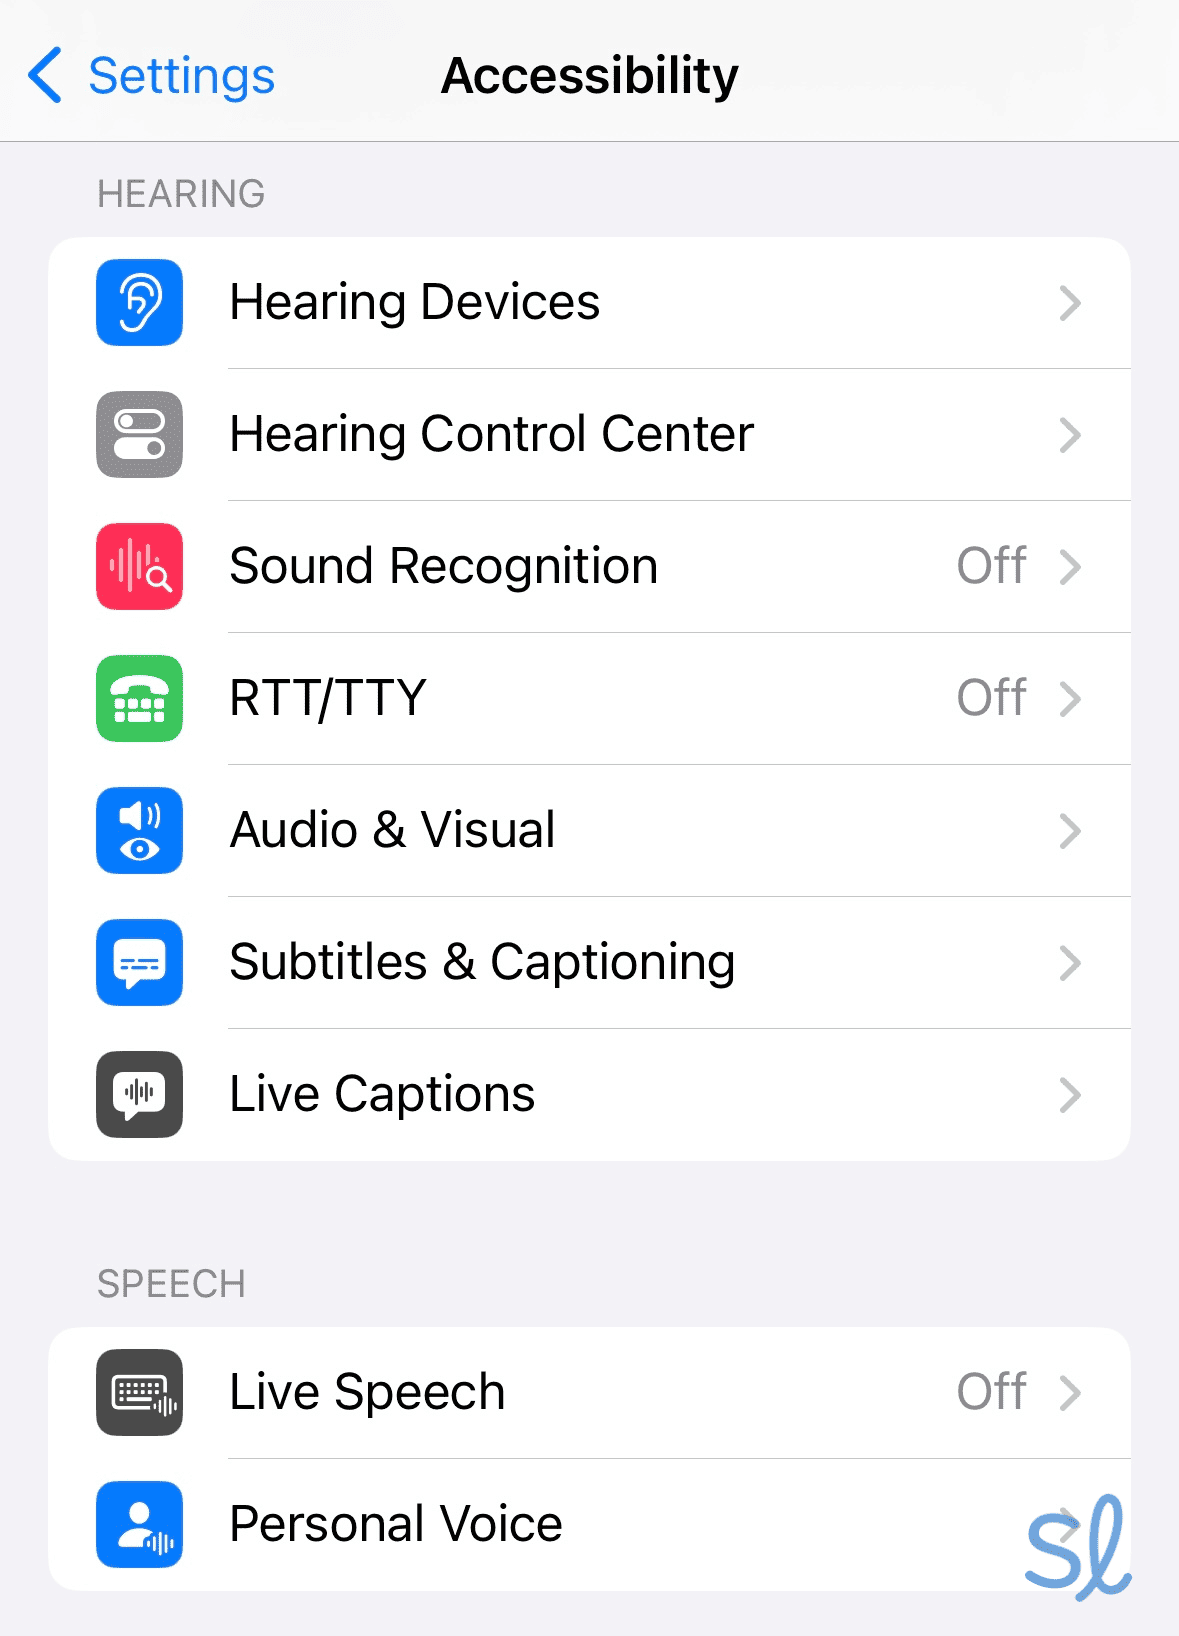 Using the iPhone's accessibility features for those with hearing loss